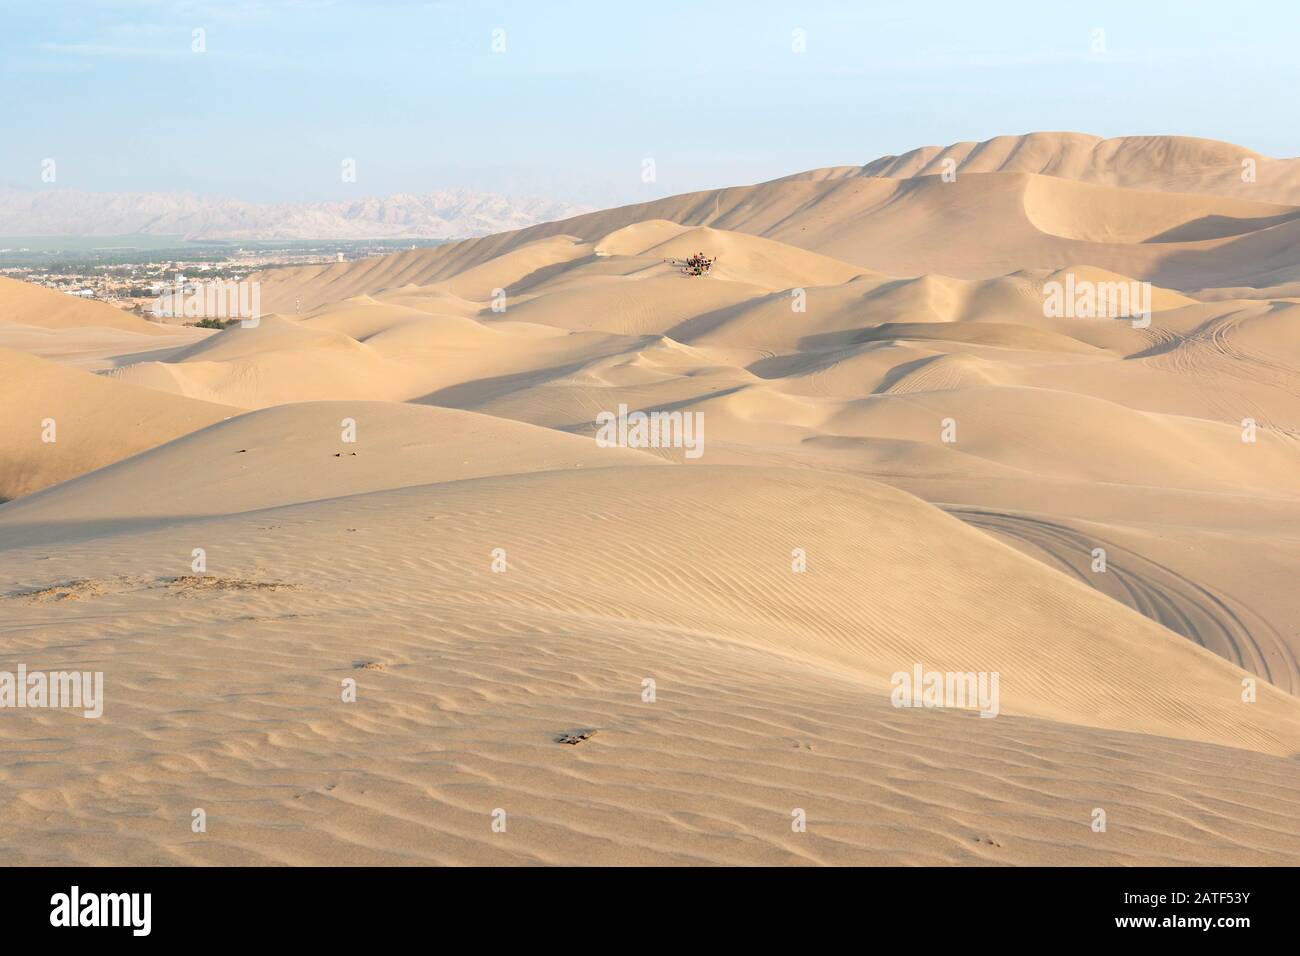 View of the Ica desert, a large and infinite large seen from the Huacachina where a group of tourists can also be seen in the distance Ica-Peru Stock Photo